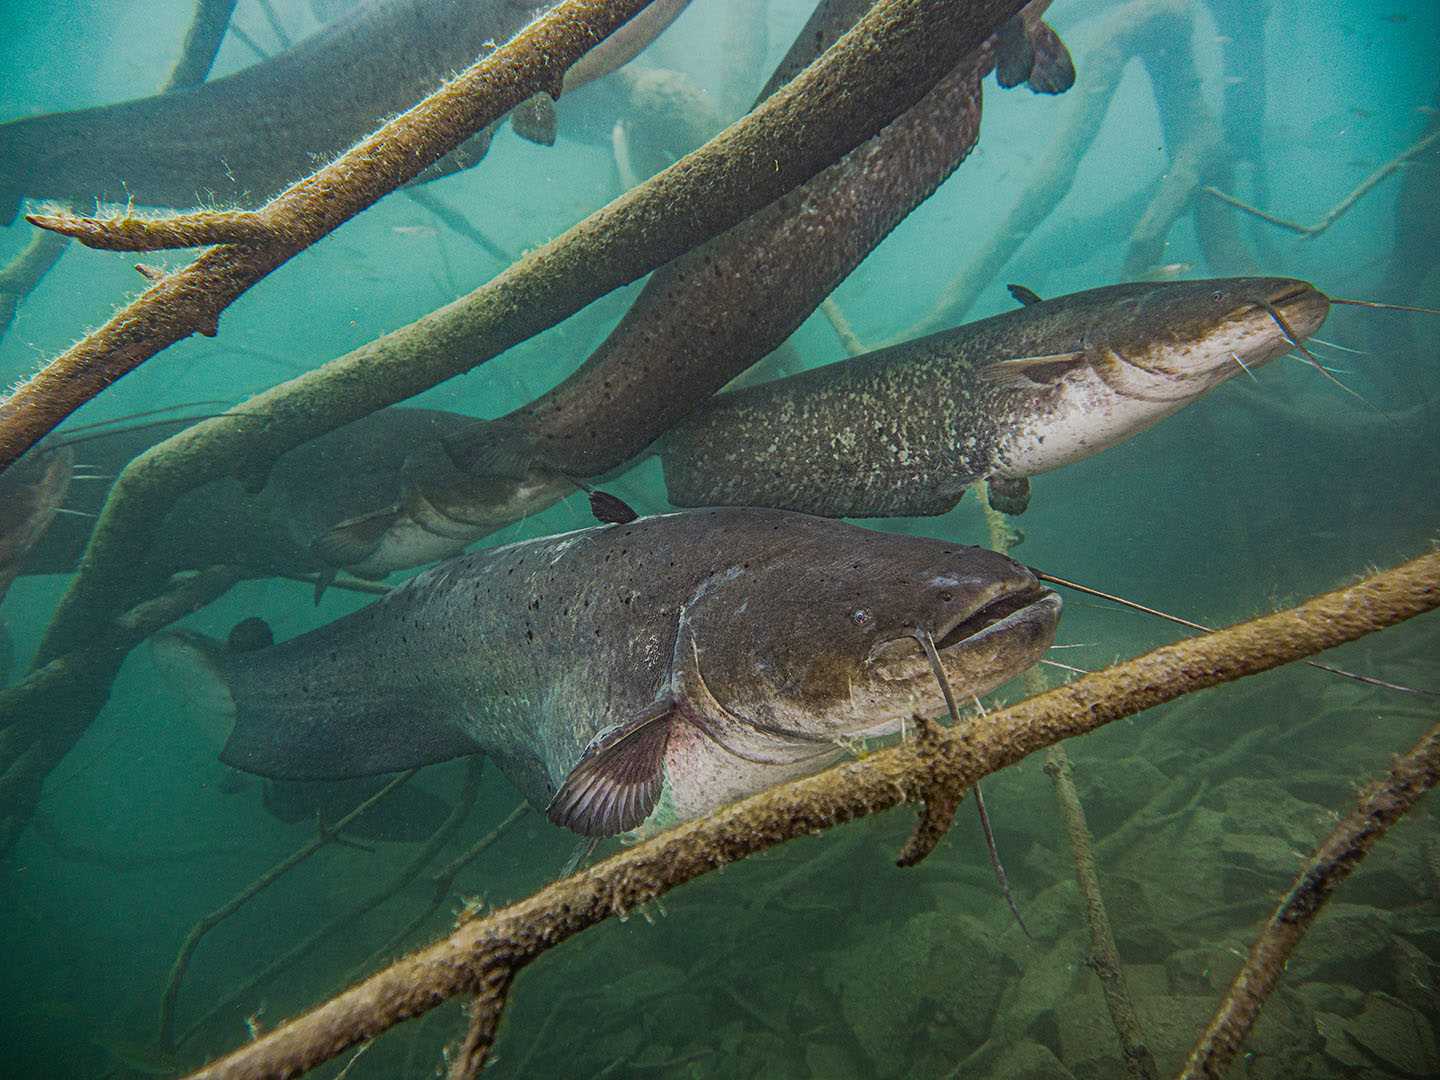 Catfish and other fish commonly bioaccumulate PCBs, which move up the food chain into humans.